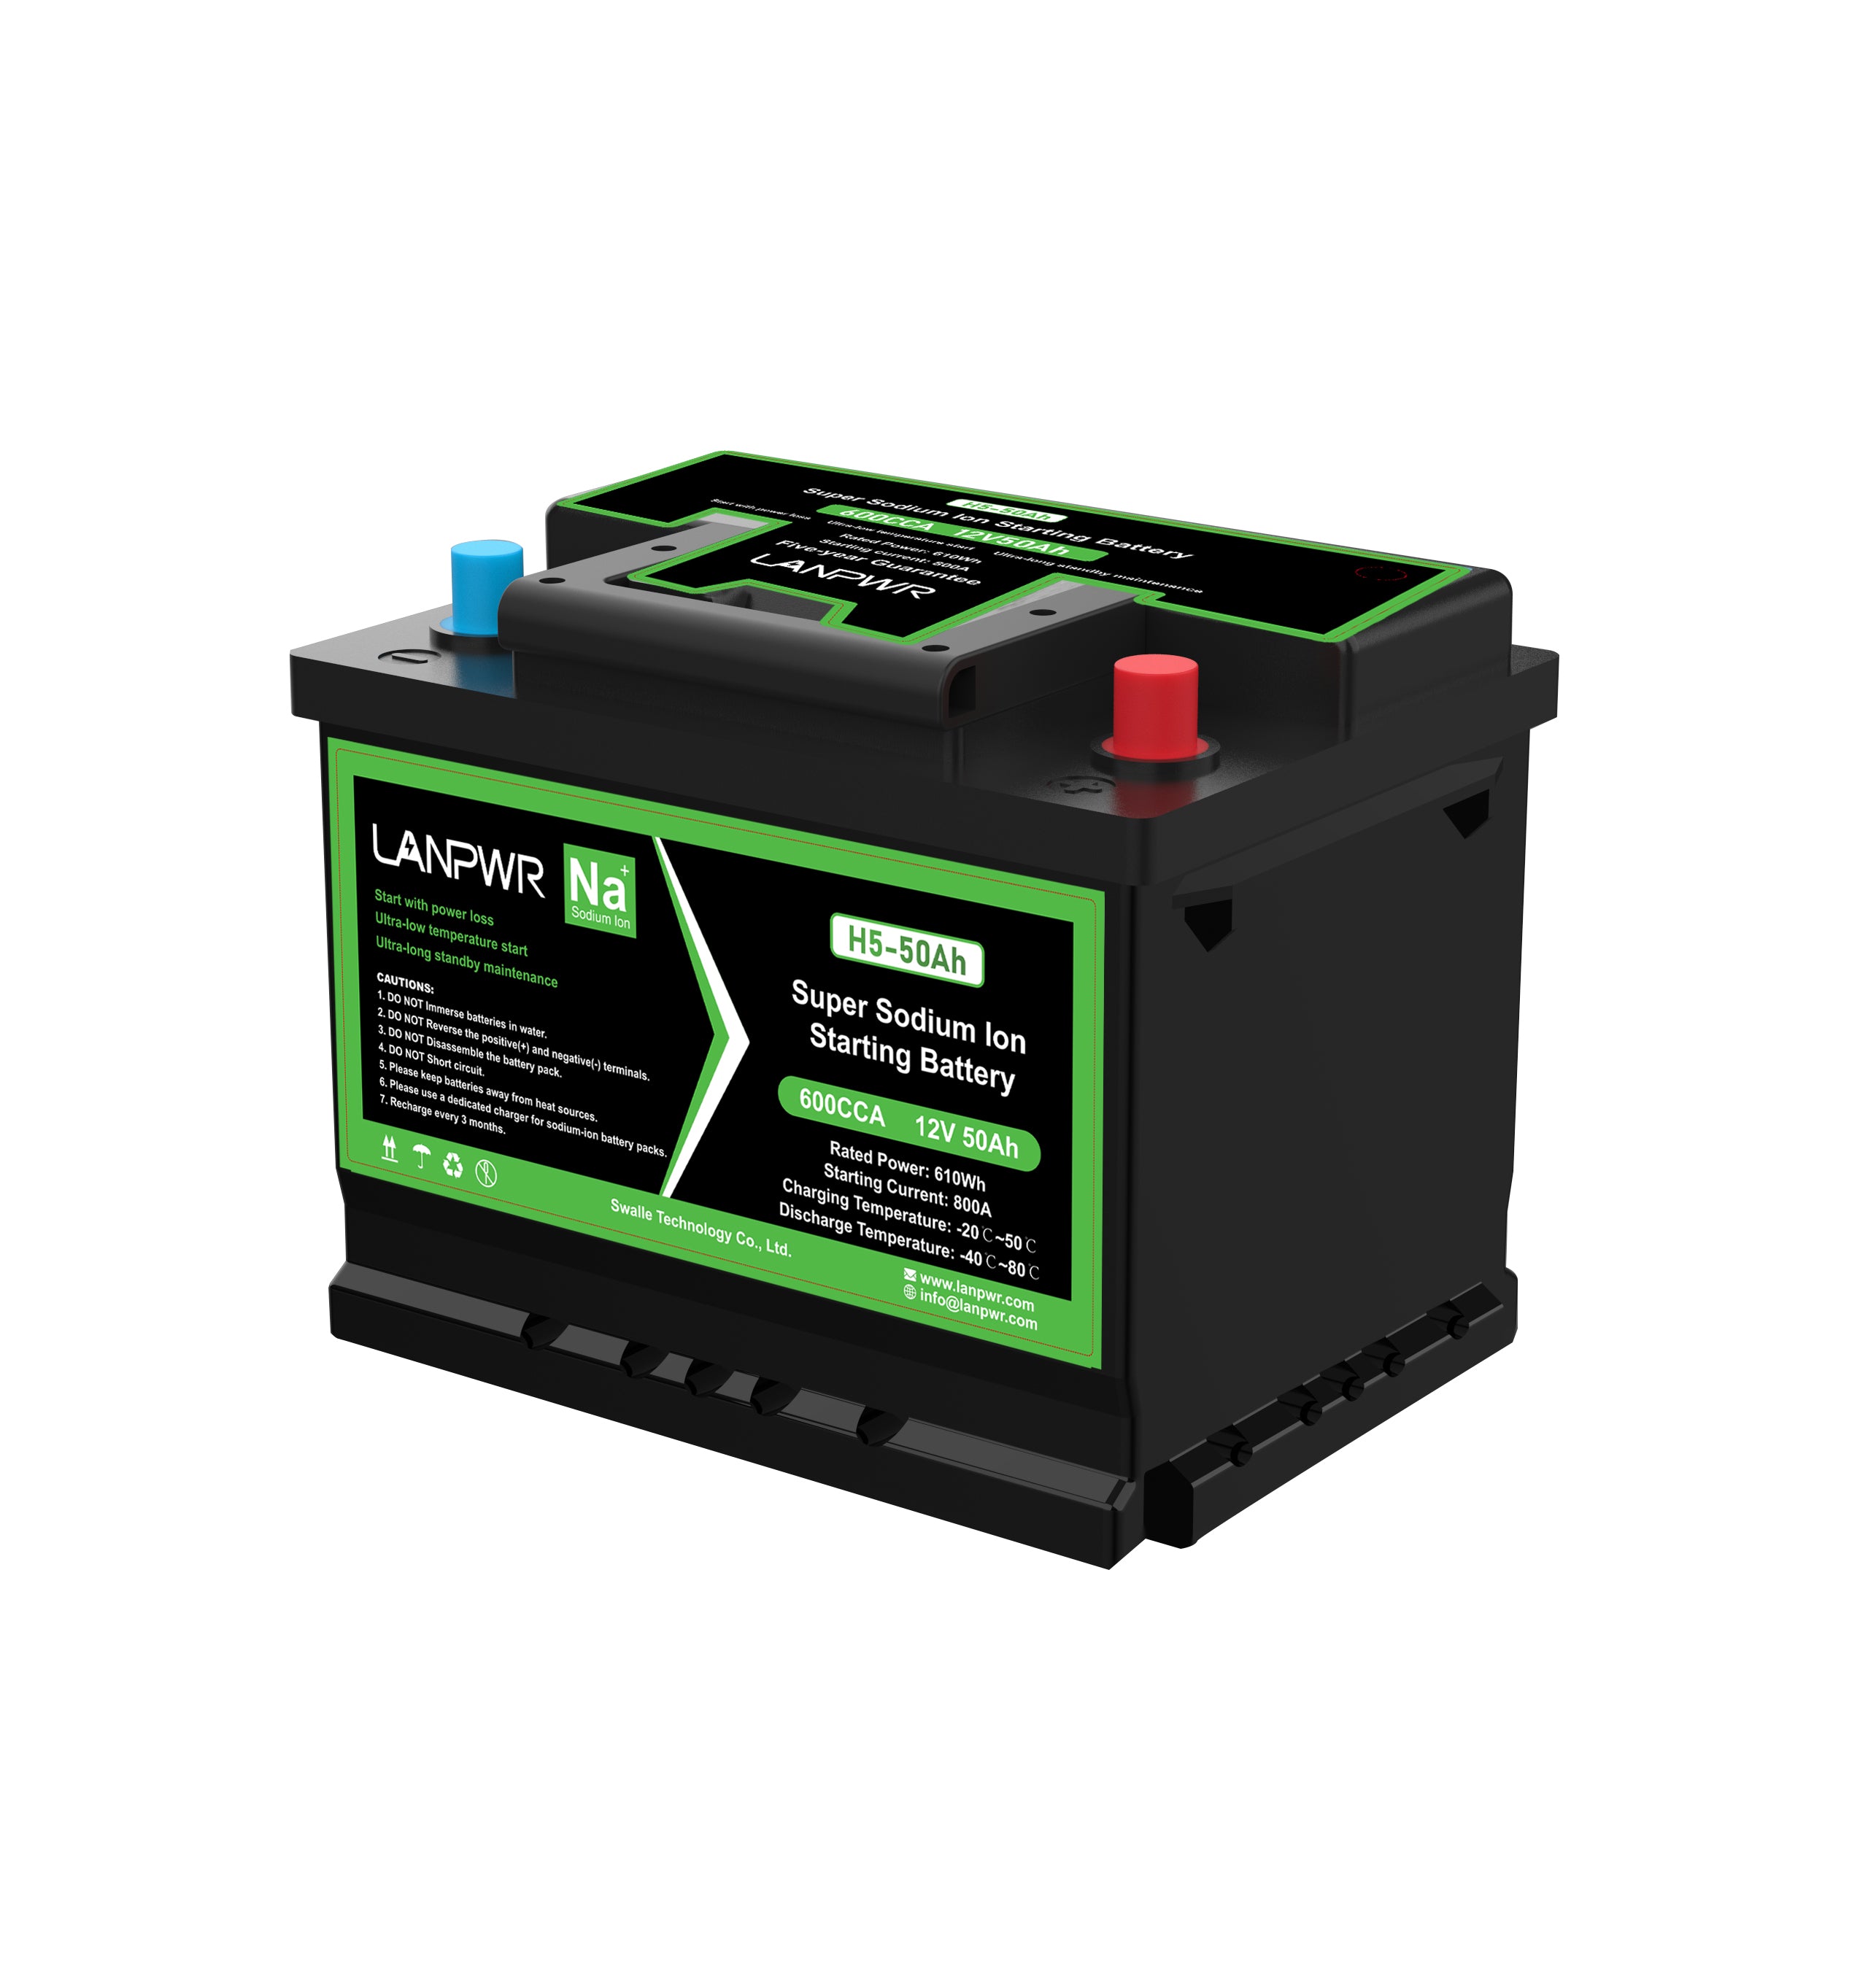 LANPWR Group-47 H5 Sodium-ion Car Battery 12V 50Ah 610Wh (CCA actual testing exceeds 700)